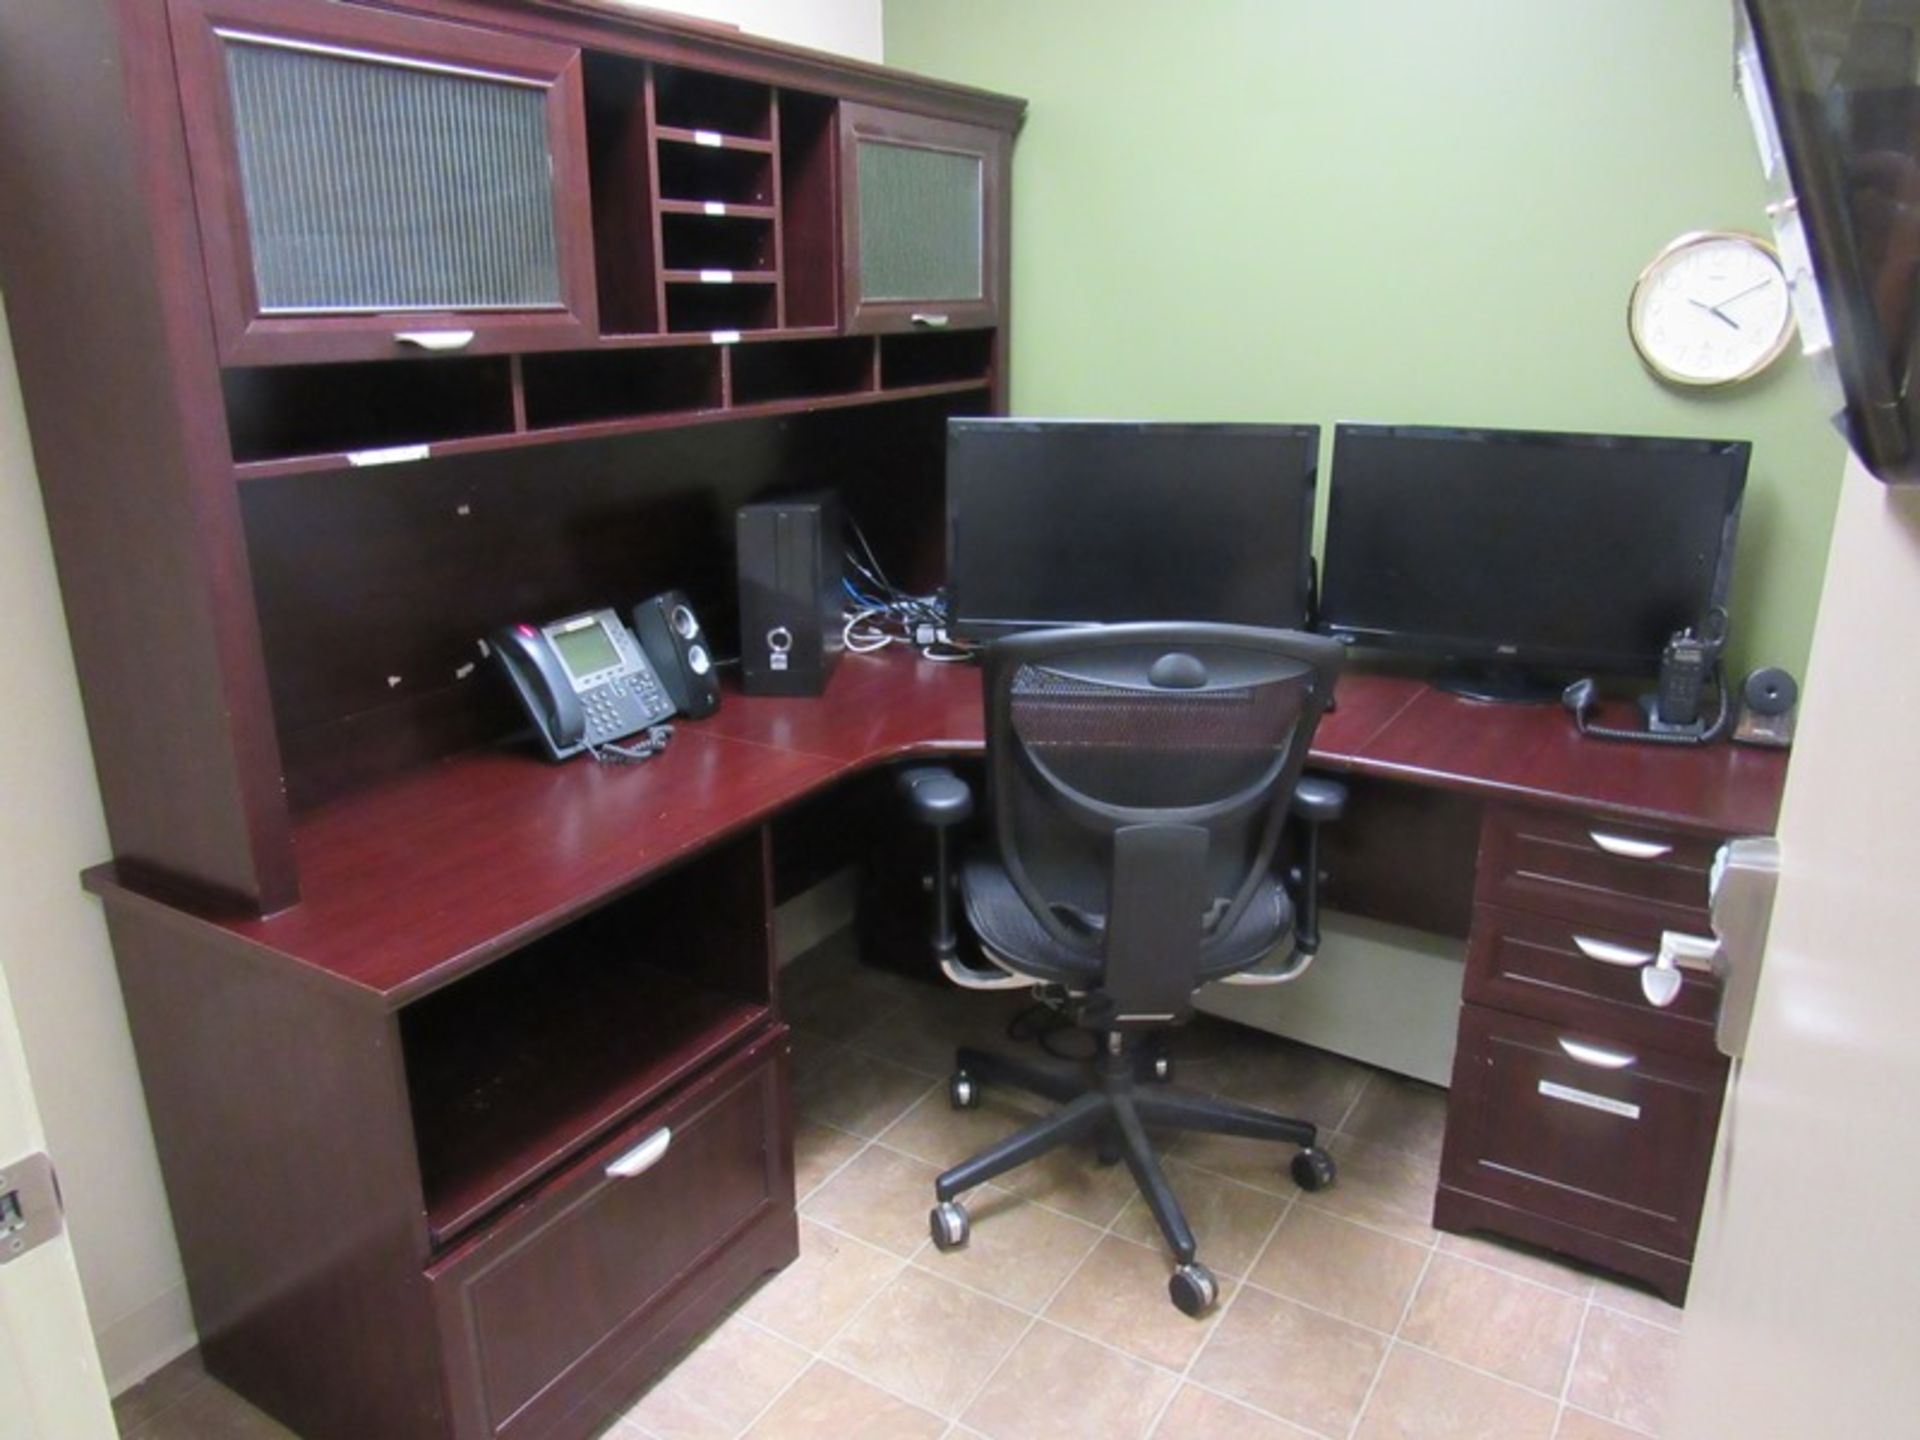 Lot Office: Desk, Chair, Heater (No Electronics or Tagged Items Included) (Required Loading Fee $